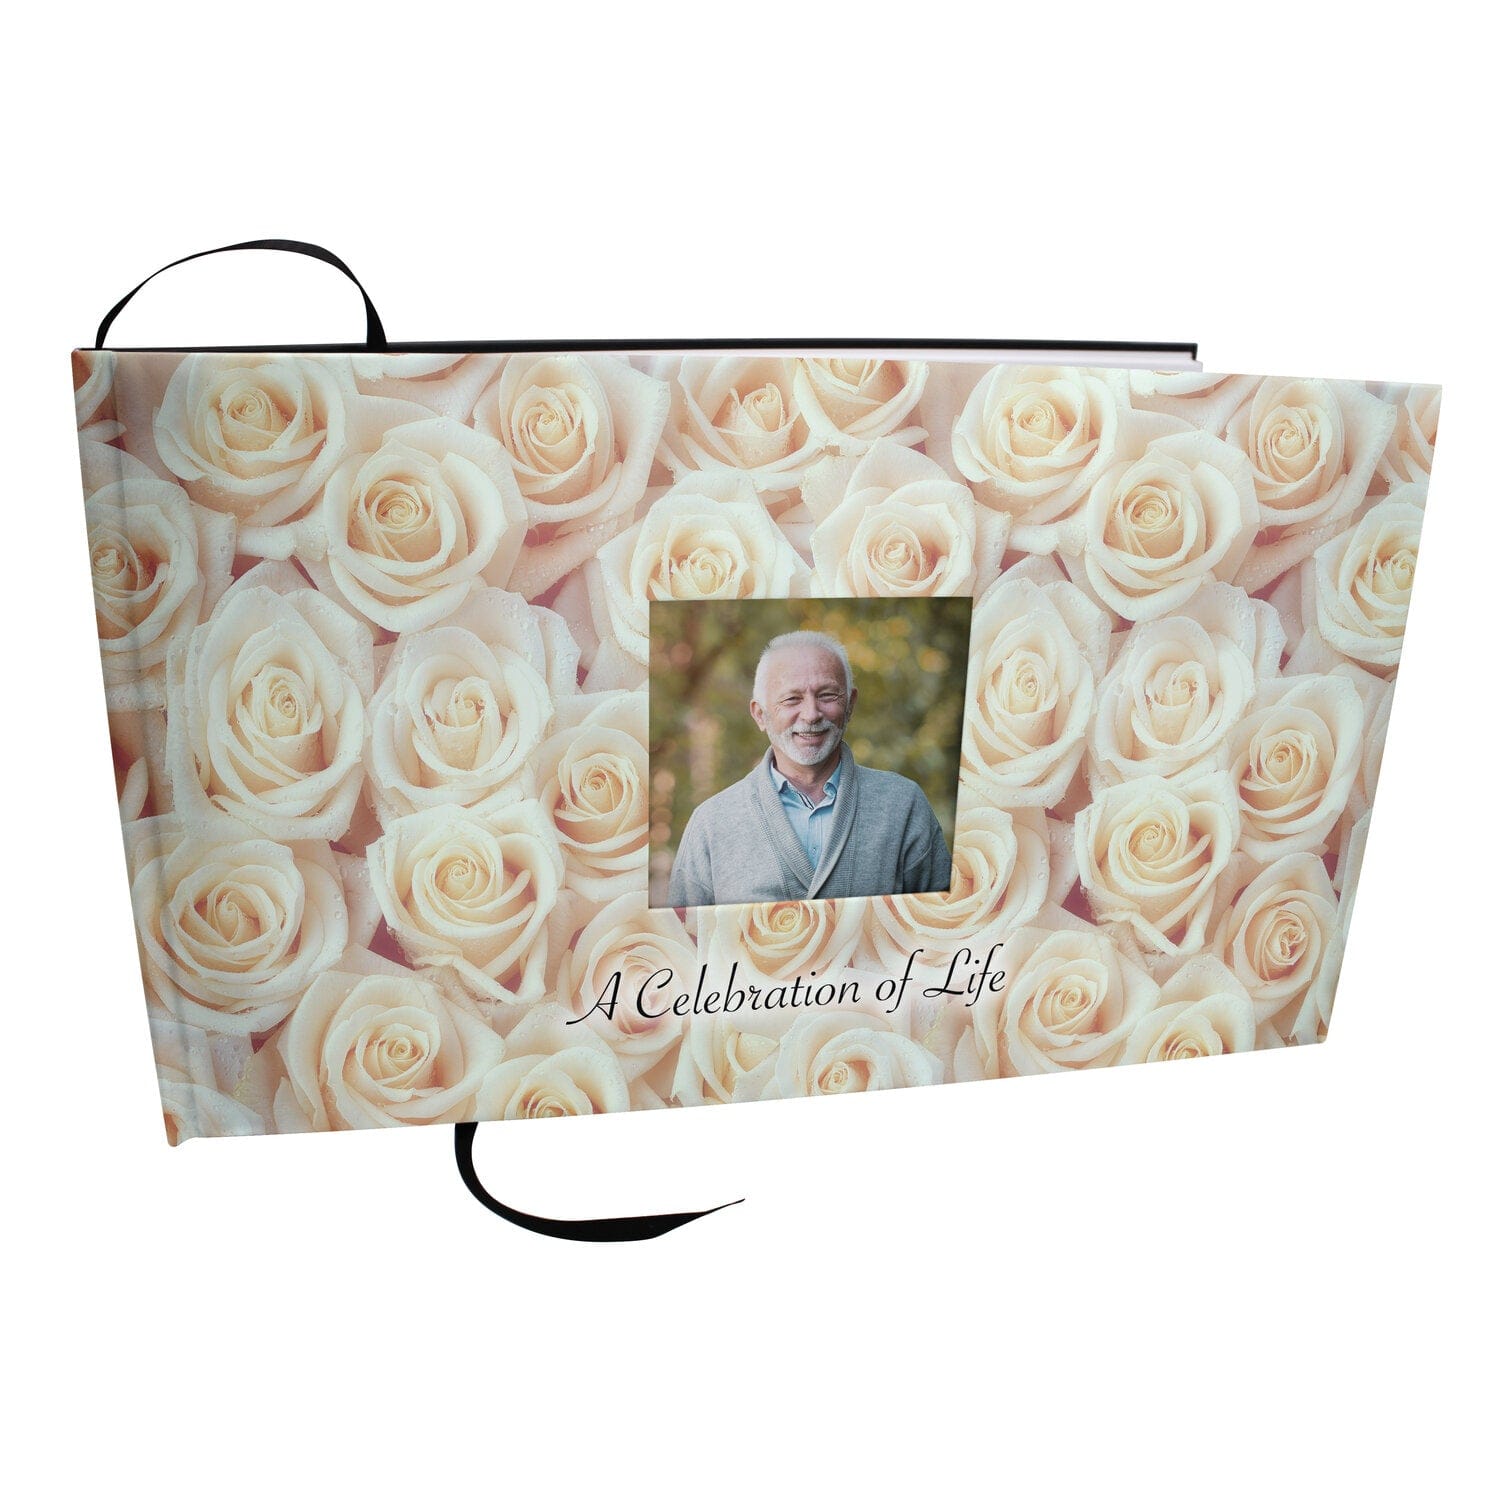 Commemorative Cremation Urns White Roses Matching Themed 'Celebration of Life' Guest Book for Funeral or Memorial Service